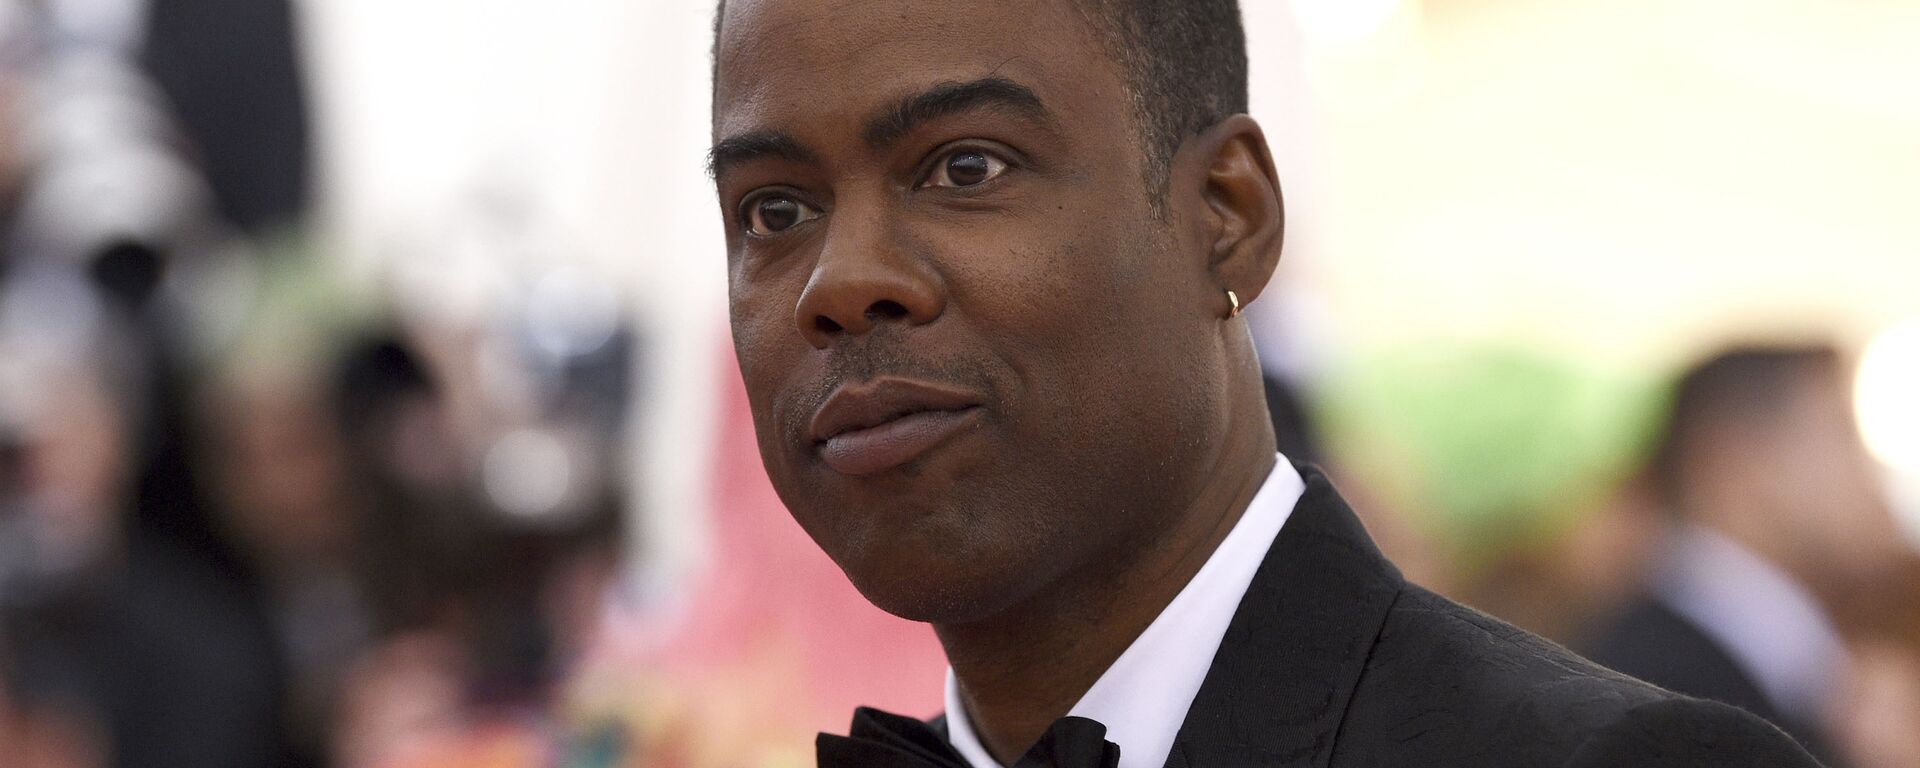 Chris Rock attends The Metropolitan Museum of Art's Costume Institute benefit gala celebrating the opening of the Camp: Notes on Fashion exhibition on Monday, May 6, 2019, in New York - Sputnik International, 1920, 01.04.2022